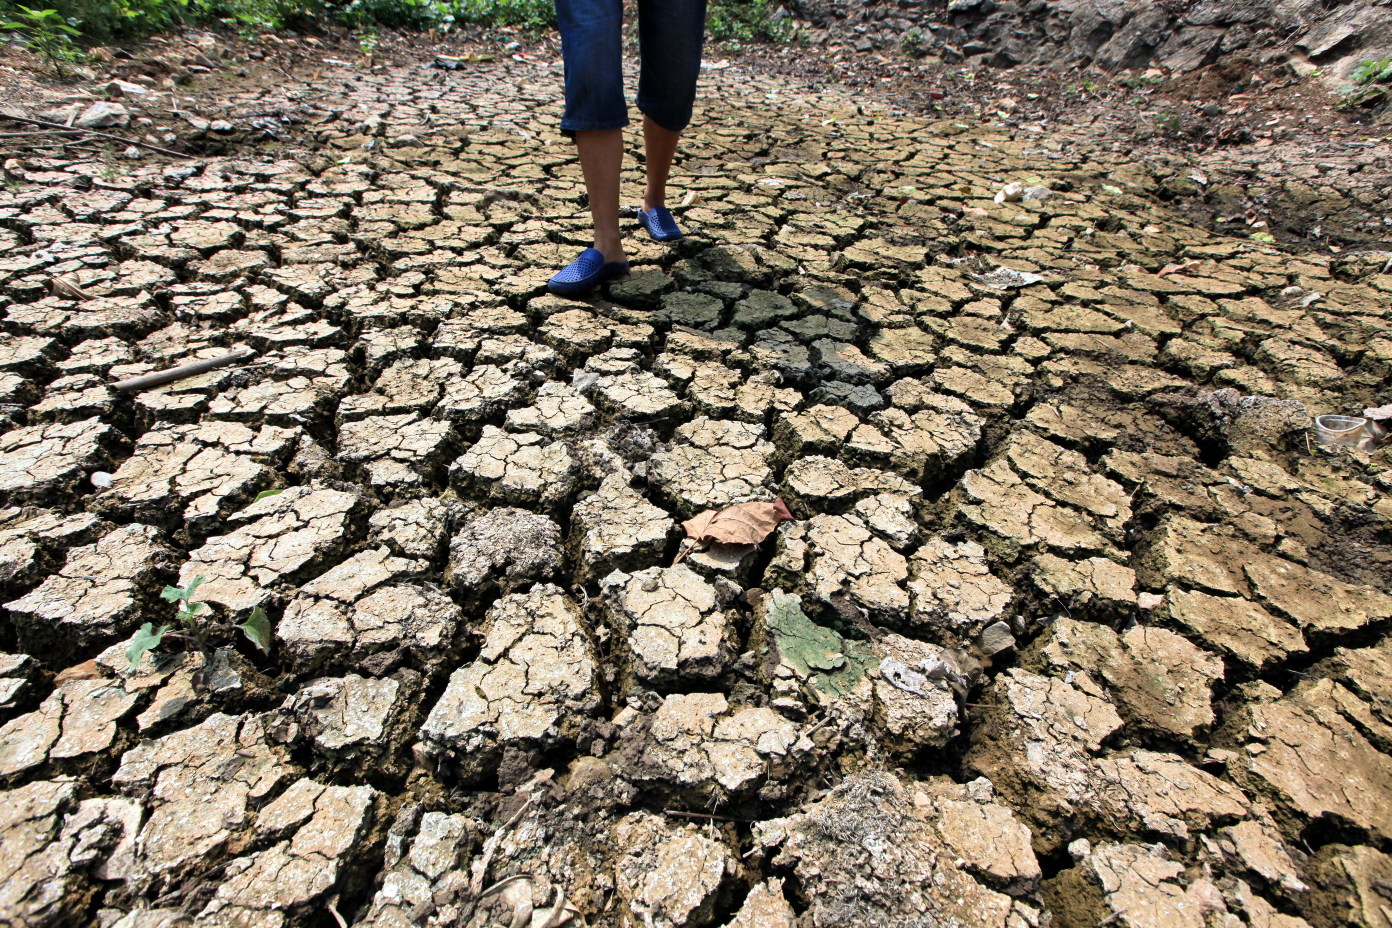 The drought affecting large areas of farmland in central China's Hubei and Henan provinces has been caused by the driest summer since 1961, say officials. Photo: Xinhua